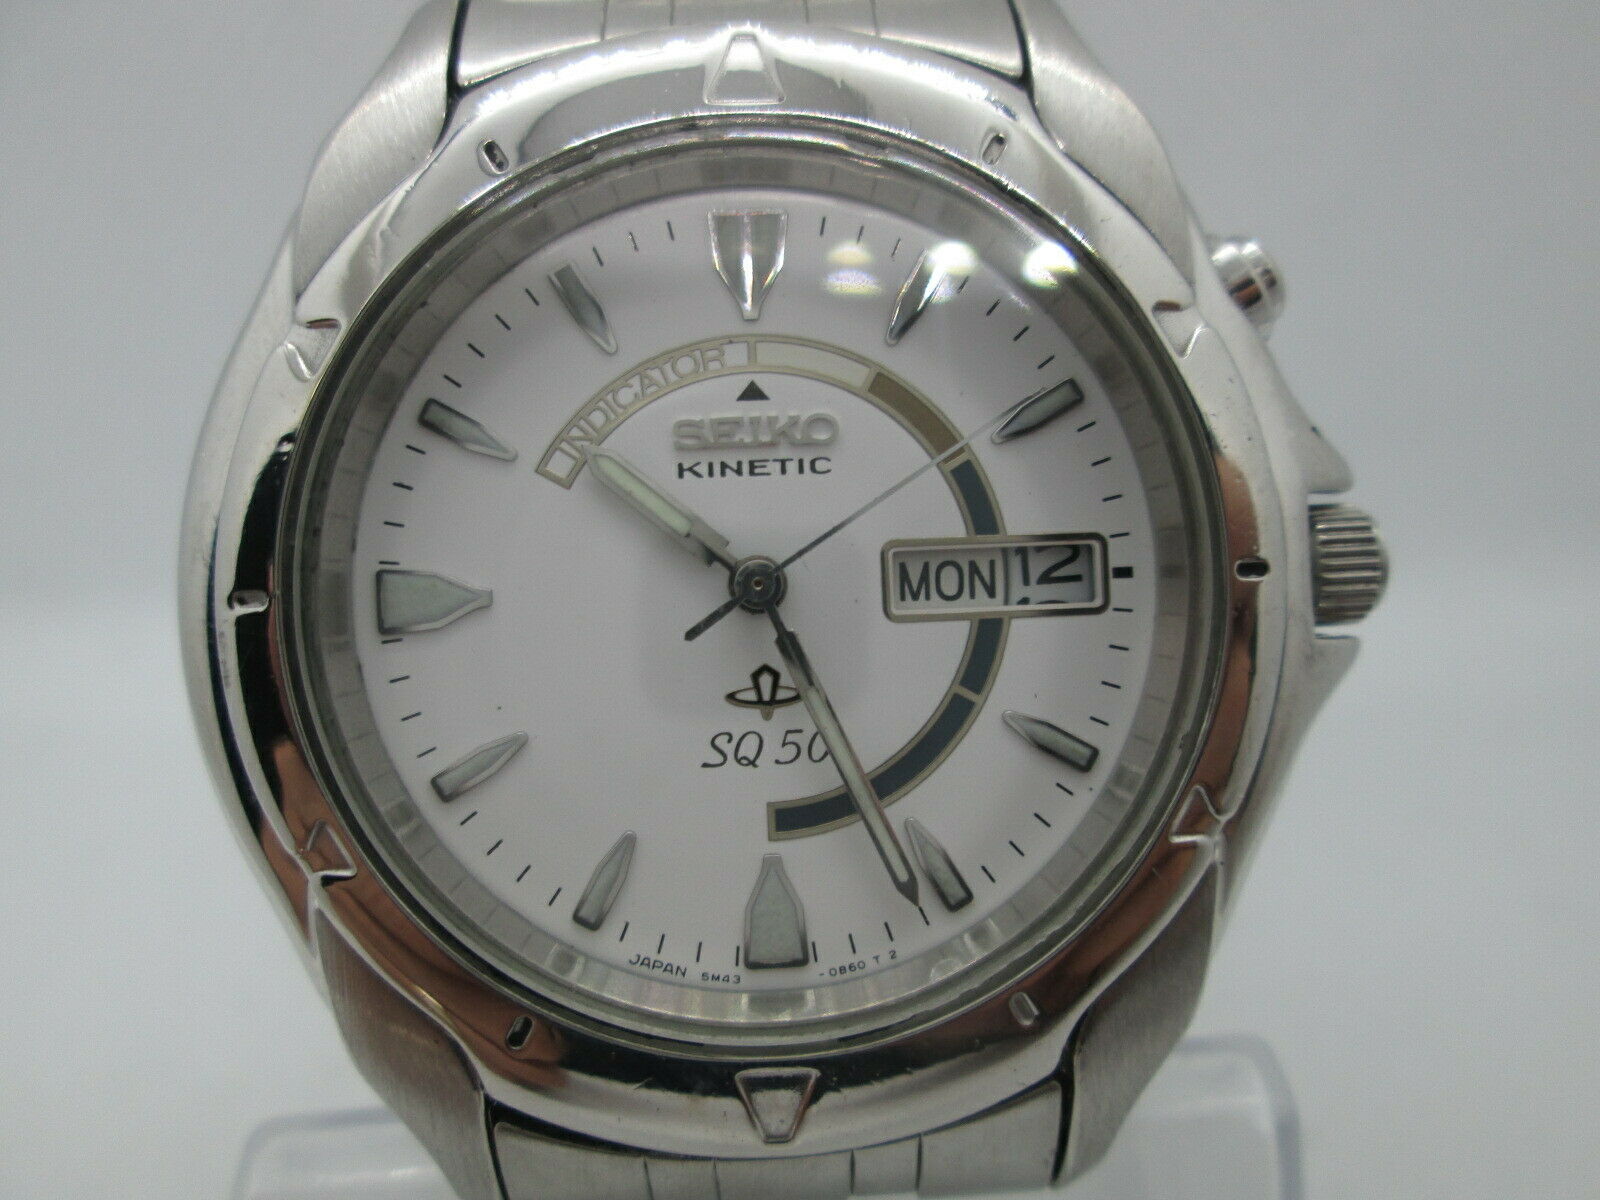 SEIKO Kinetic SQ50 5M43-0A50 Men's Watch Day/Date Japan 